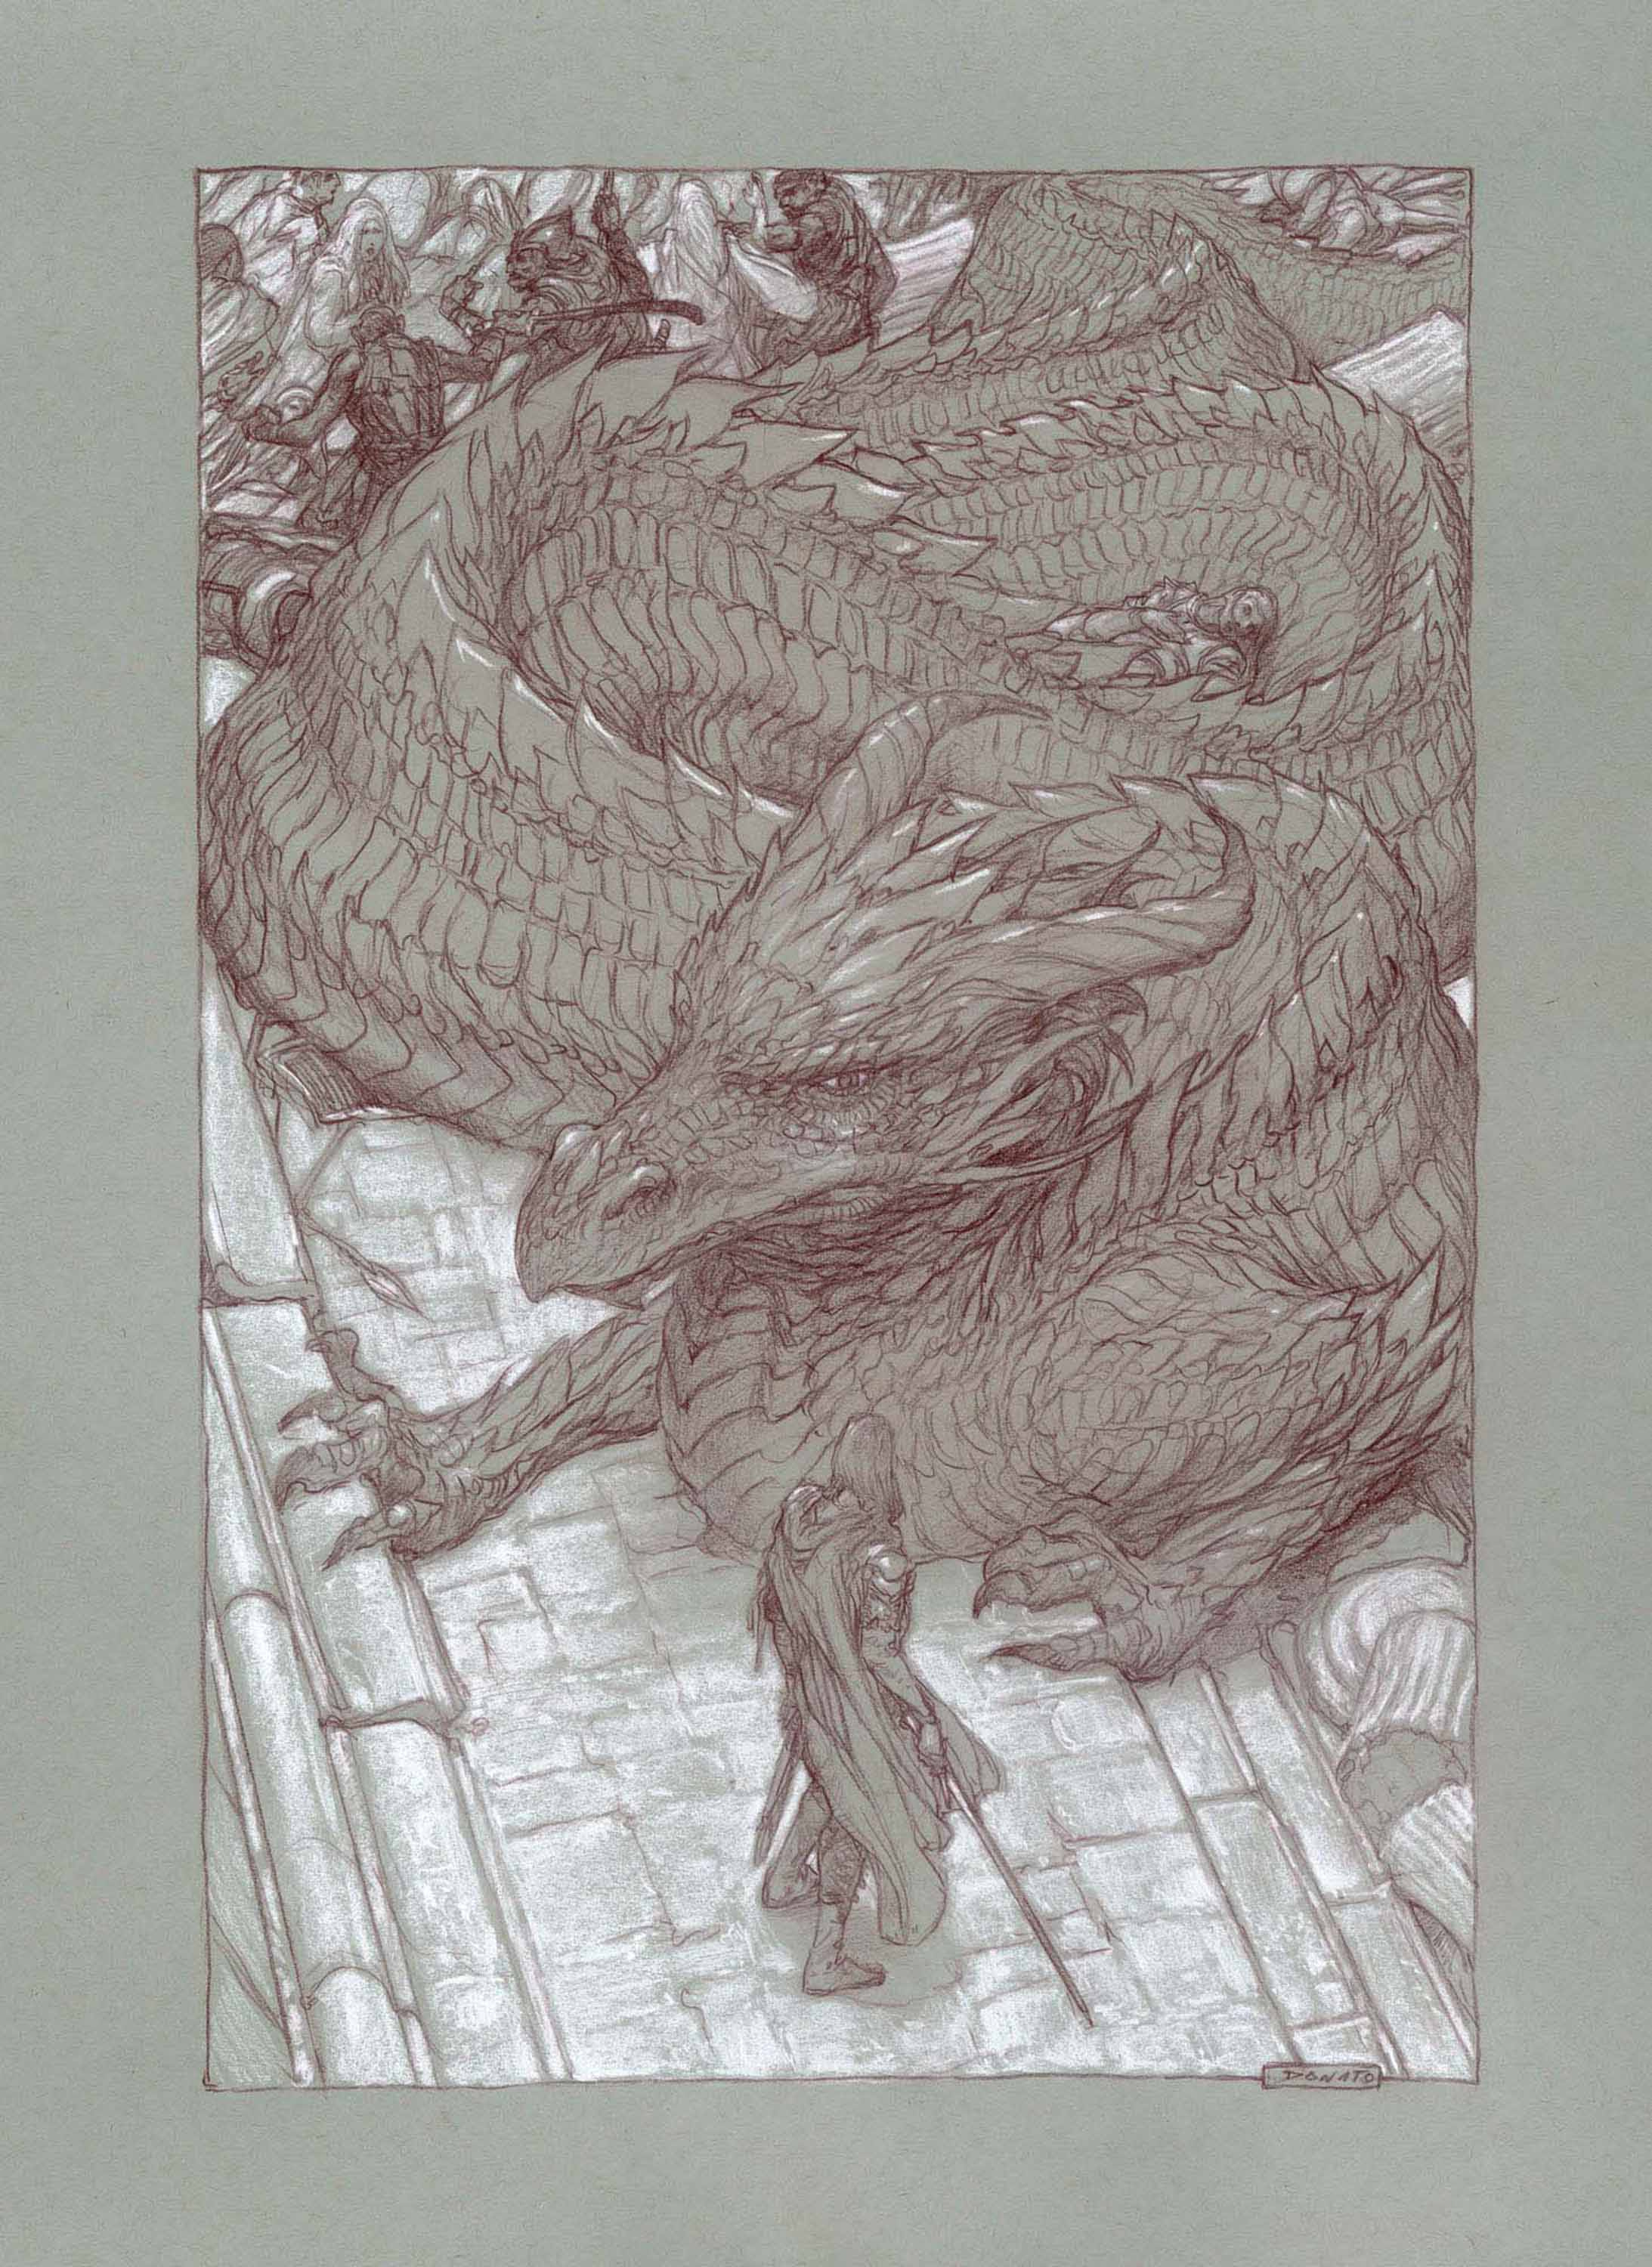 Turin and Glaurung at the Gates of Nargothrond
24" x18"  Watercolor Pencil and Chalk on Toned paper 2016
collection of Chris Redlich